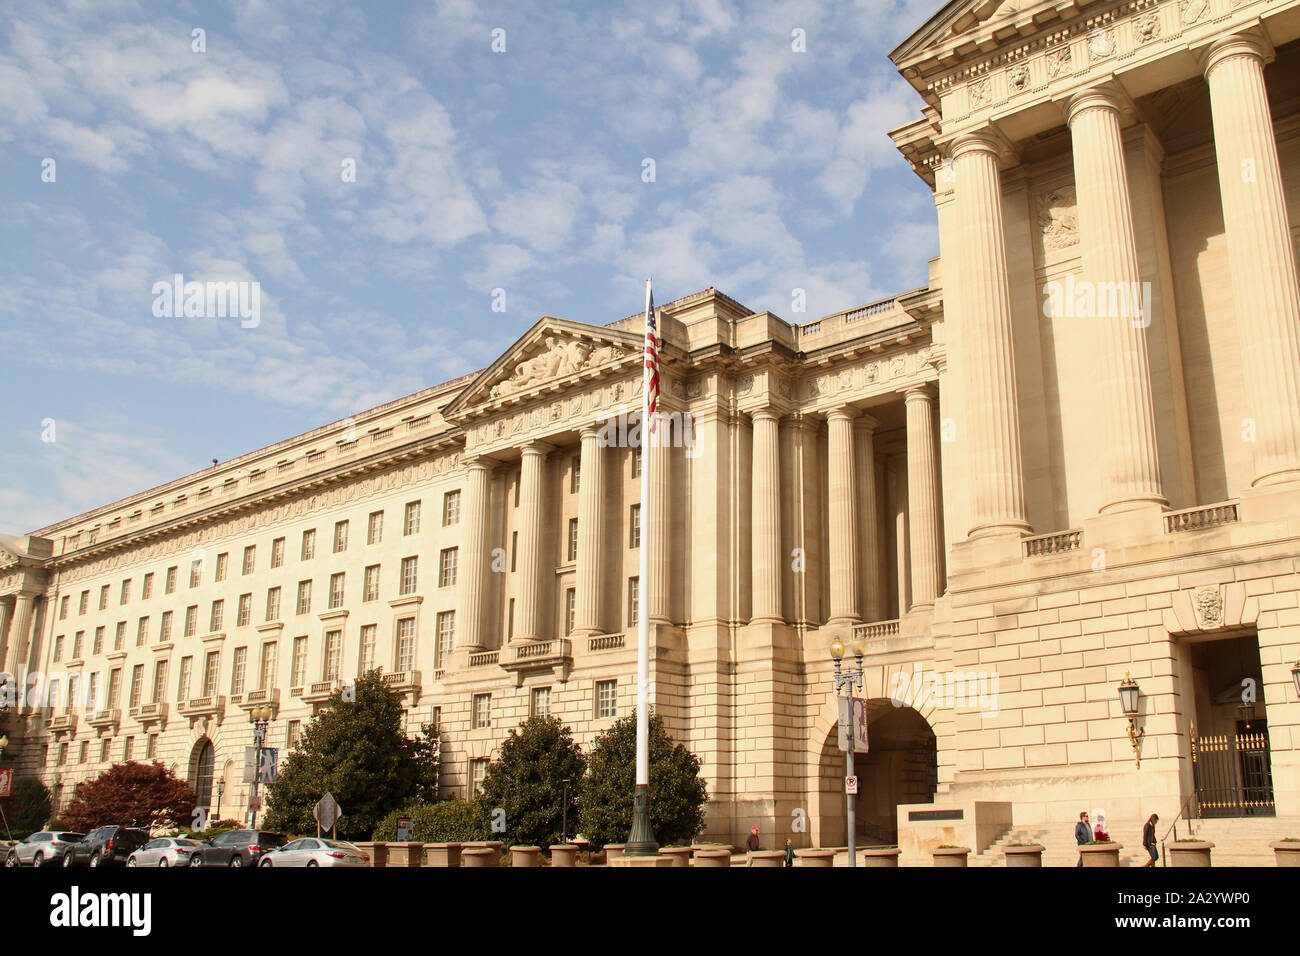 The William Jefferson Clinton Building on Constitution Ave NW, Washington DC, United States. Stock Photo